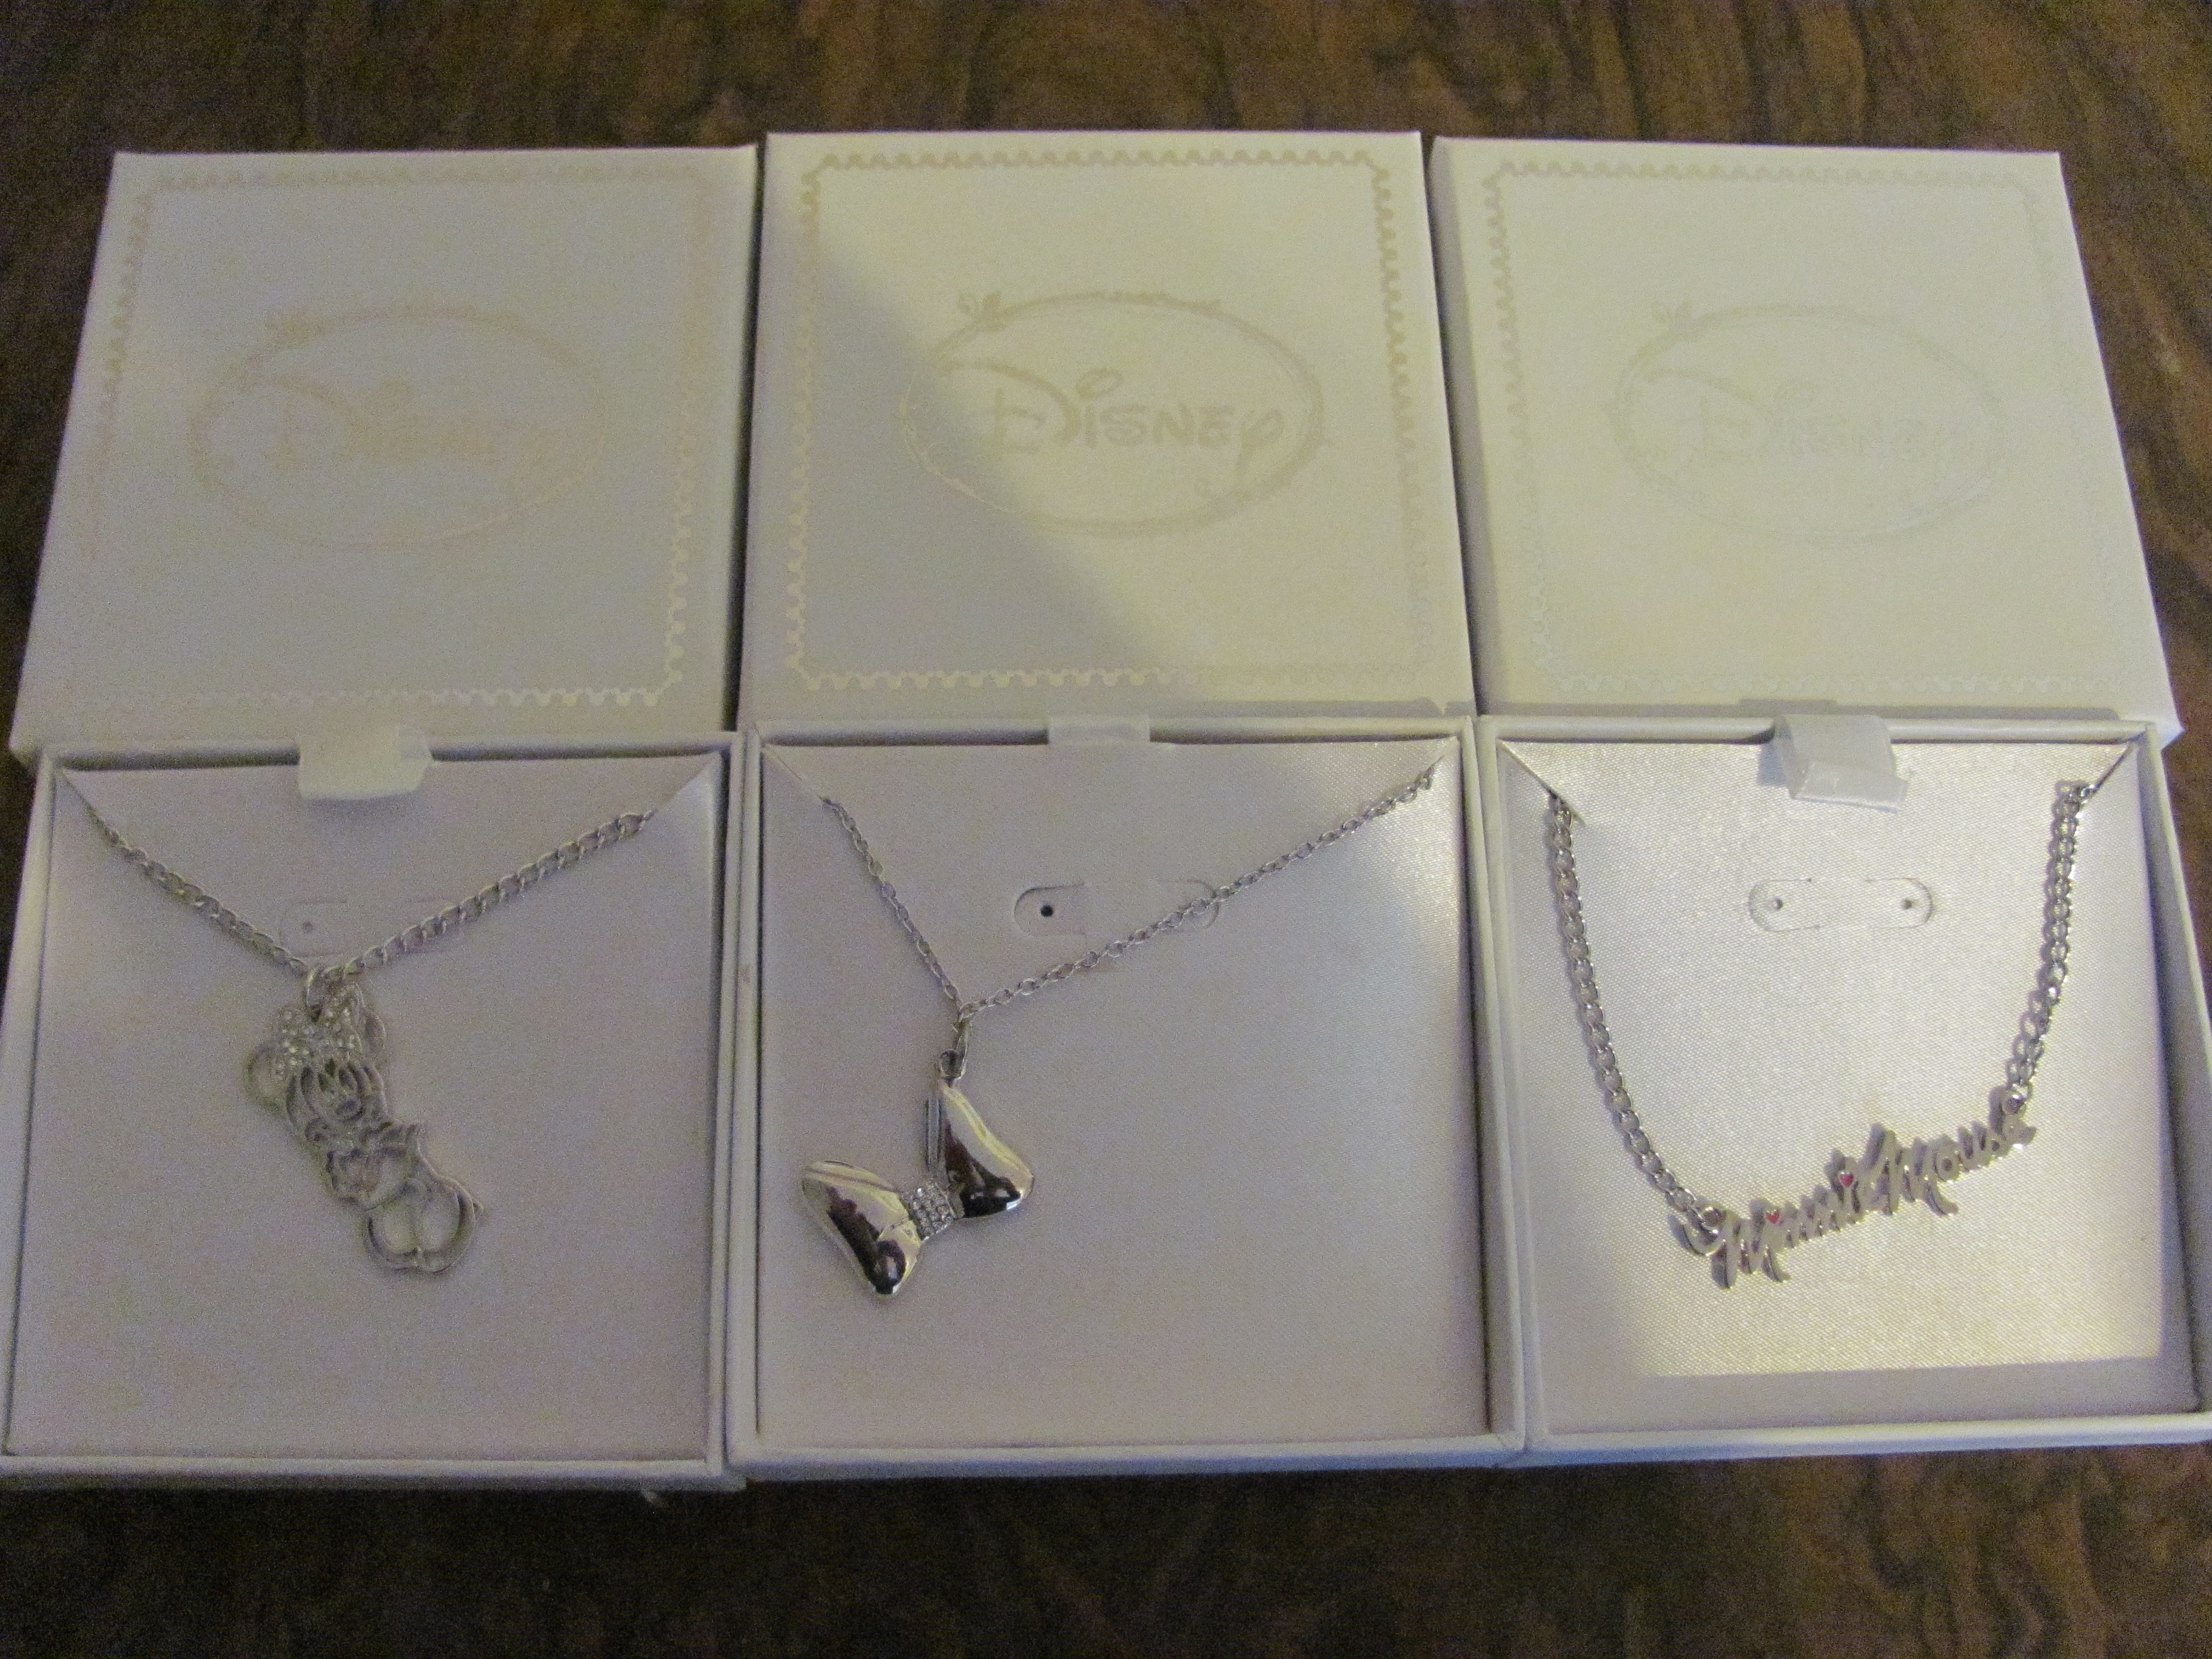 30 x Genuine Disney Minnie mouse elegant pendants. Boxed and etched